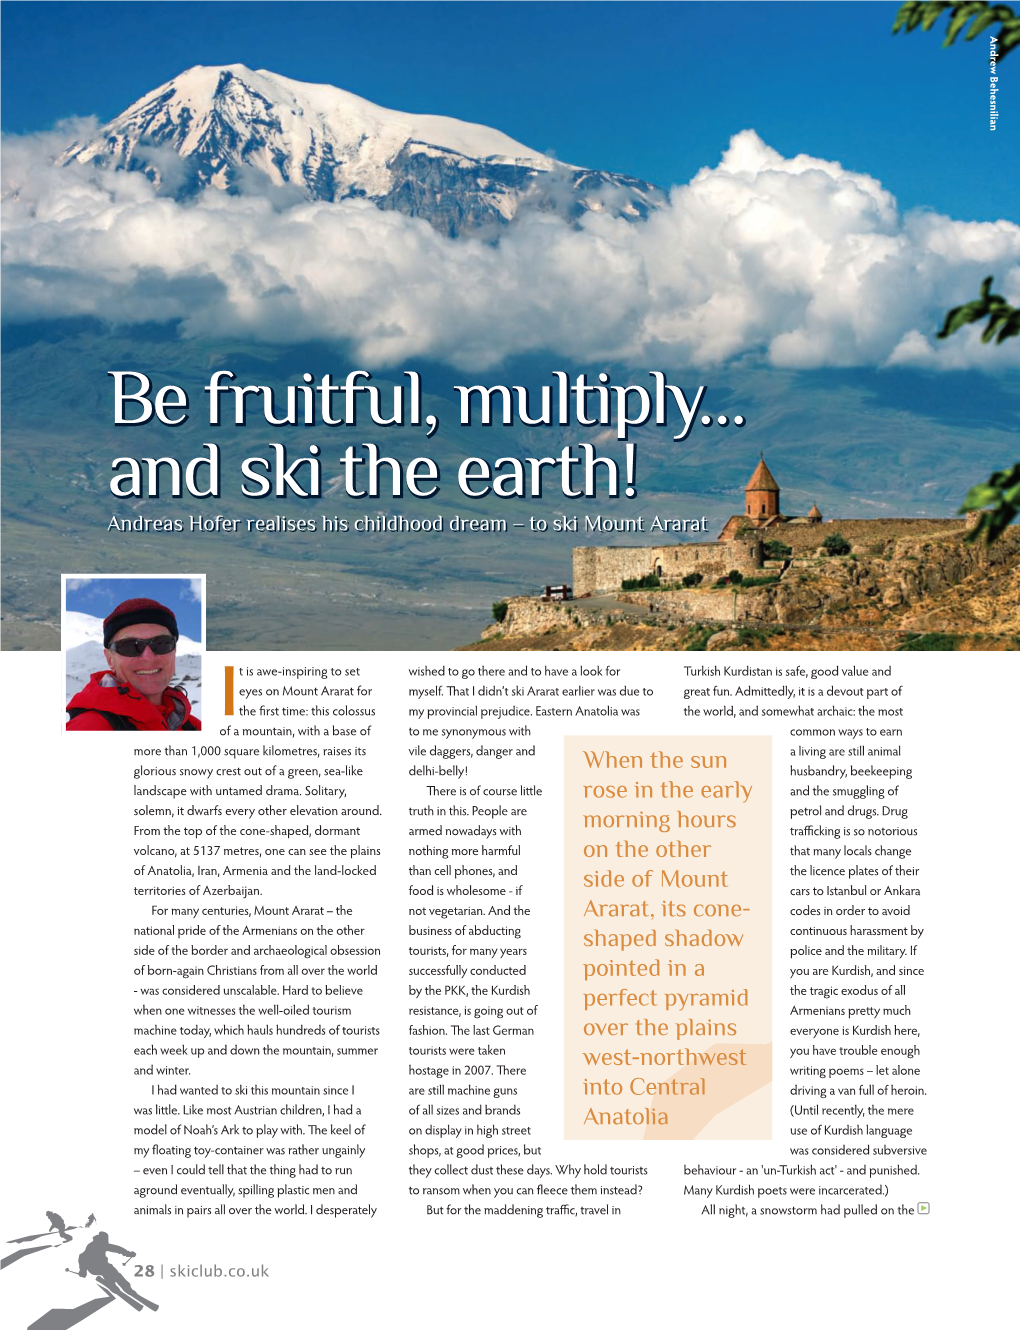 Be Fruitful, Multiply… and Ski the Earth! Andreas Hofer Realises His Childhood Dream – to Ski Mount Ararat